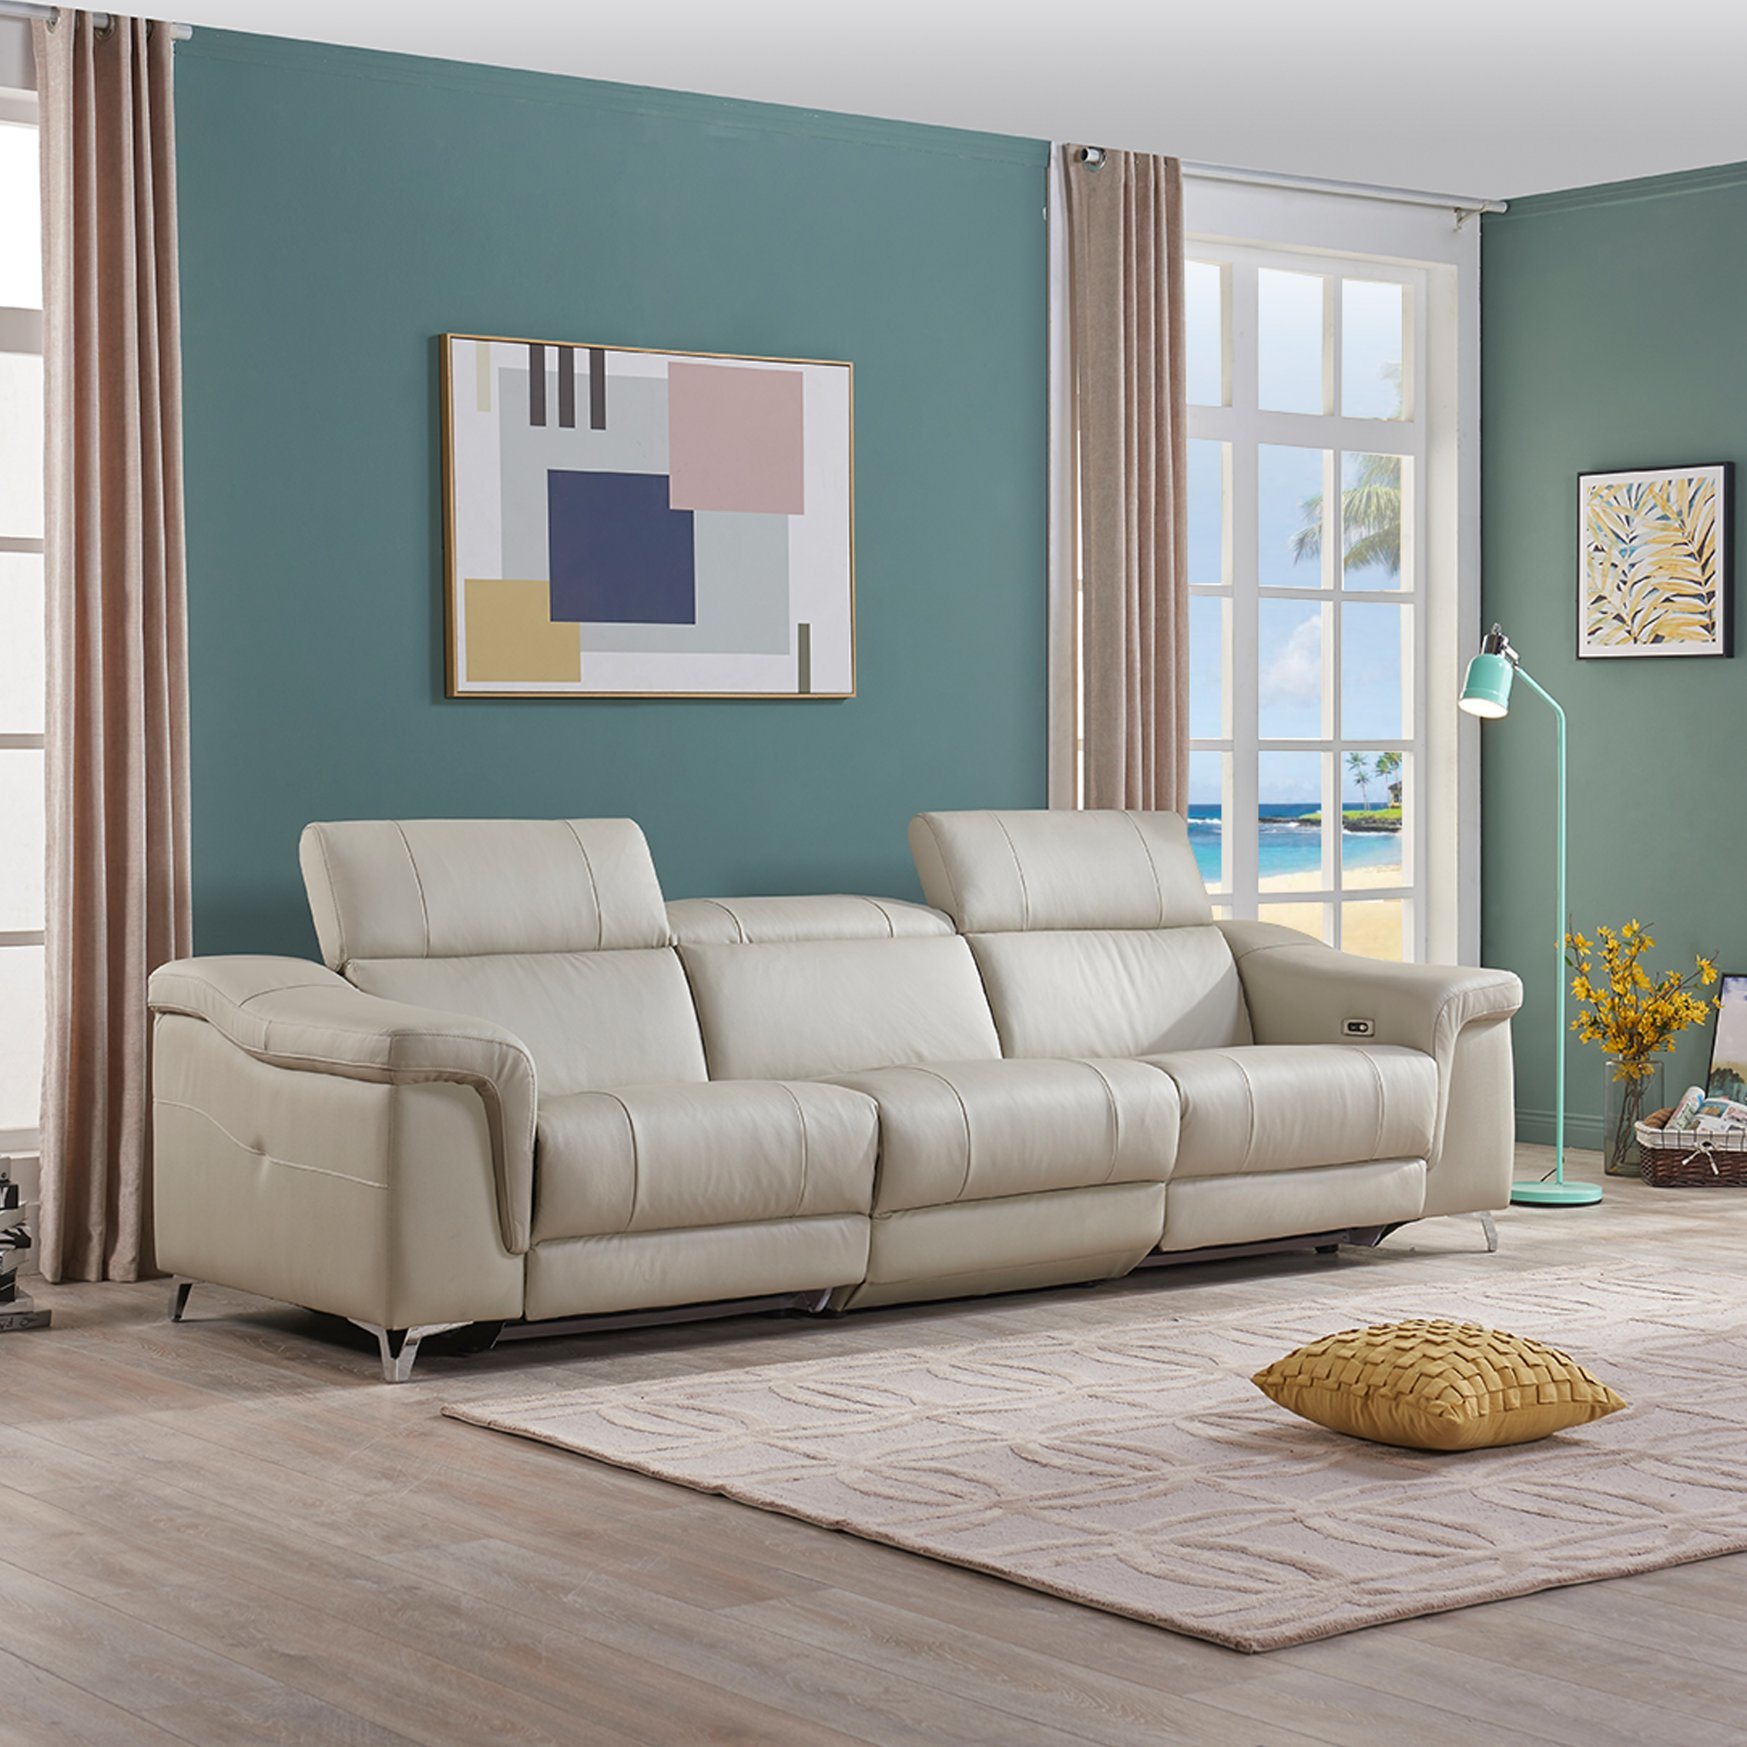 Modern Simple Living Room Small House Electric Functional Leather Sofa Combination